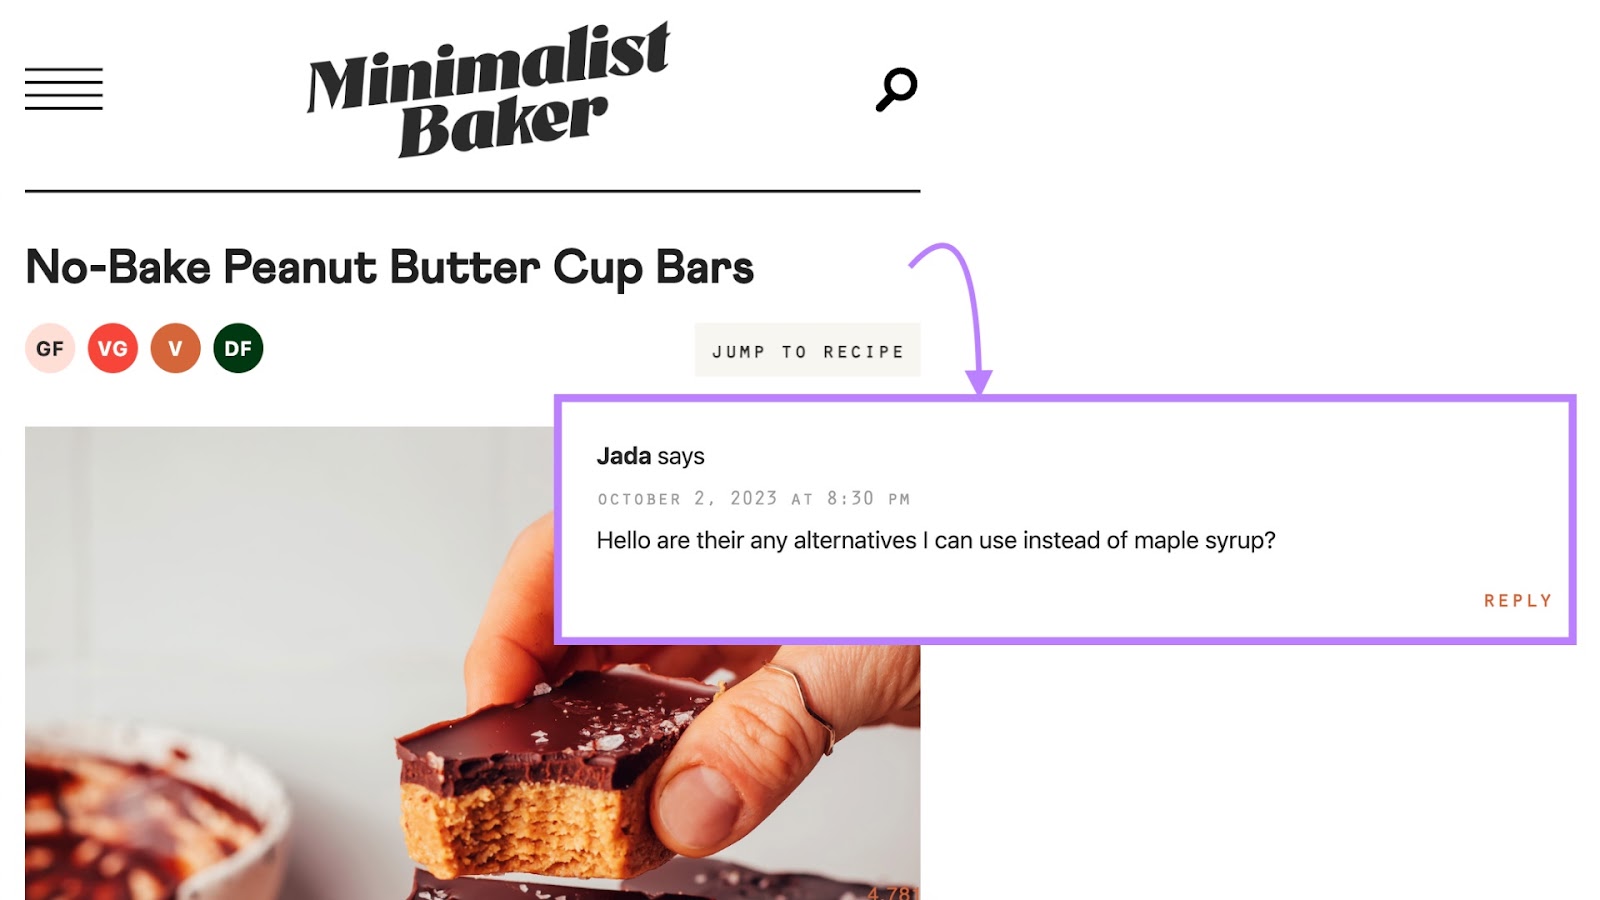 Minimalist Baker's post on no-bake peanut butter cup bars with a comment highlighted